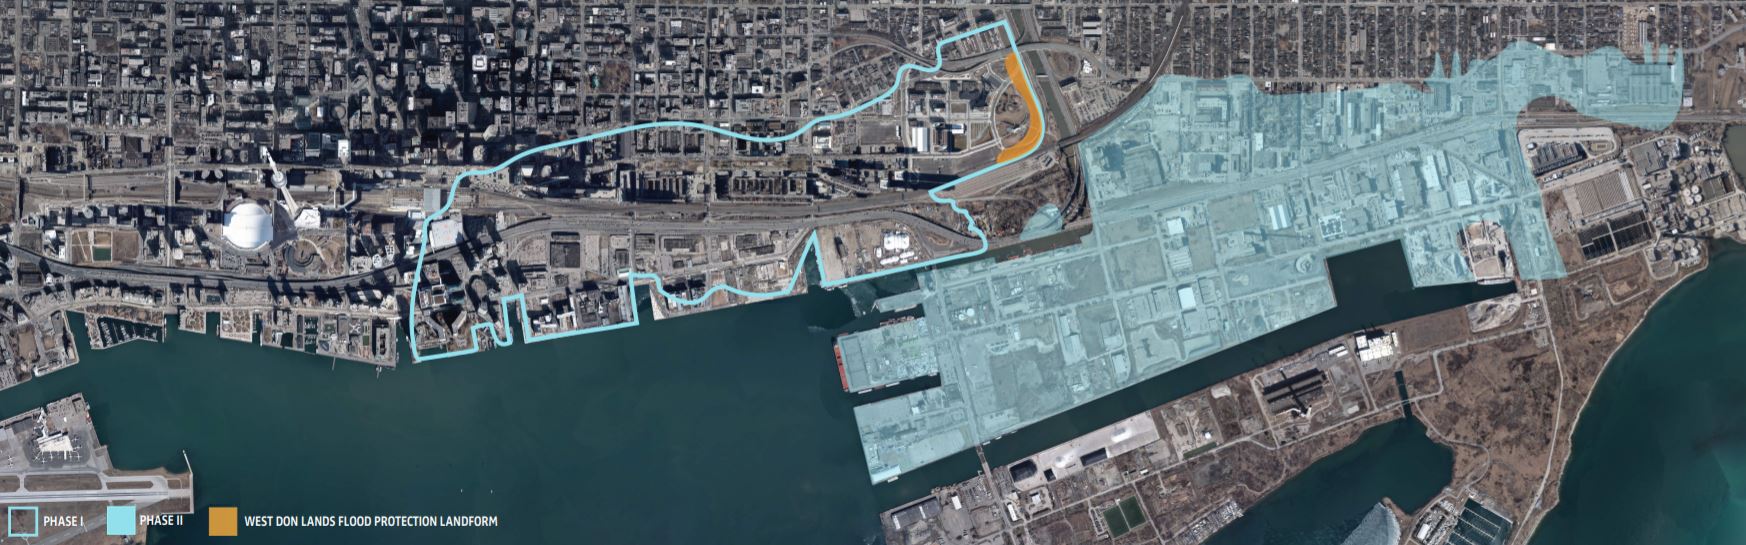 Map showing areas still subject to flooding (eastern waterfront including Port Lands, parts of Leslieville and Unilever site) and area protected already (west of Corktown Common)